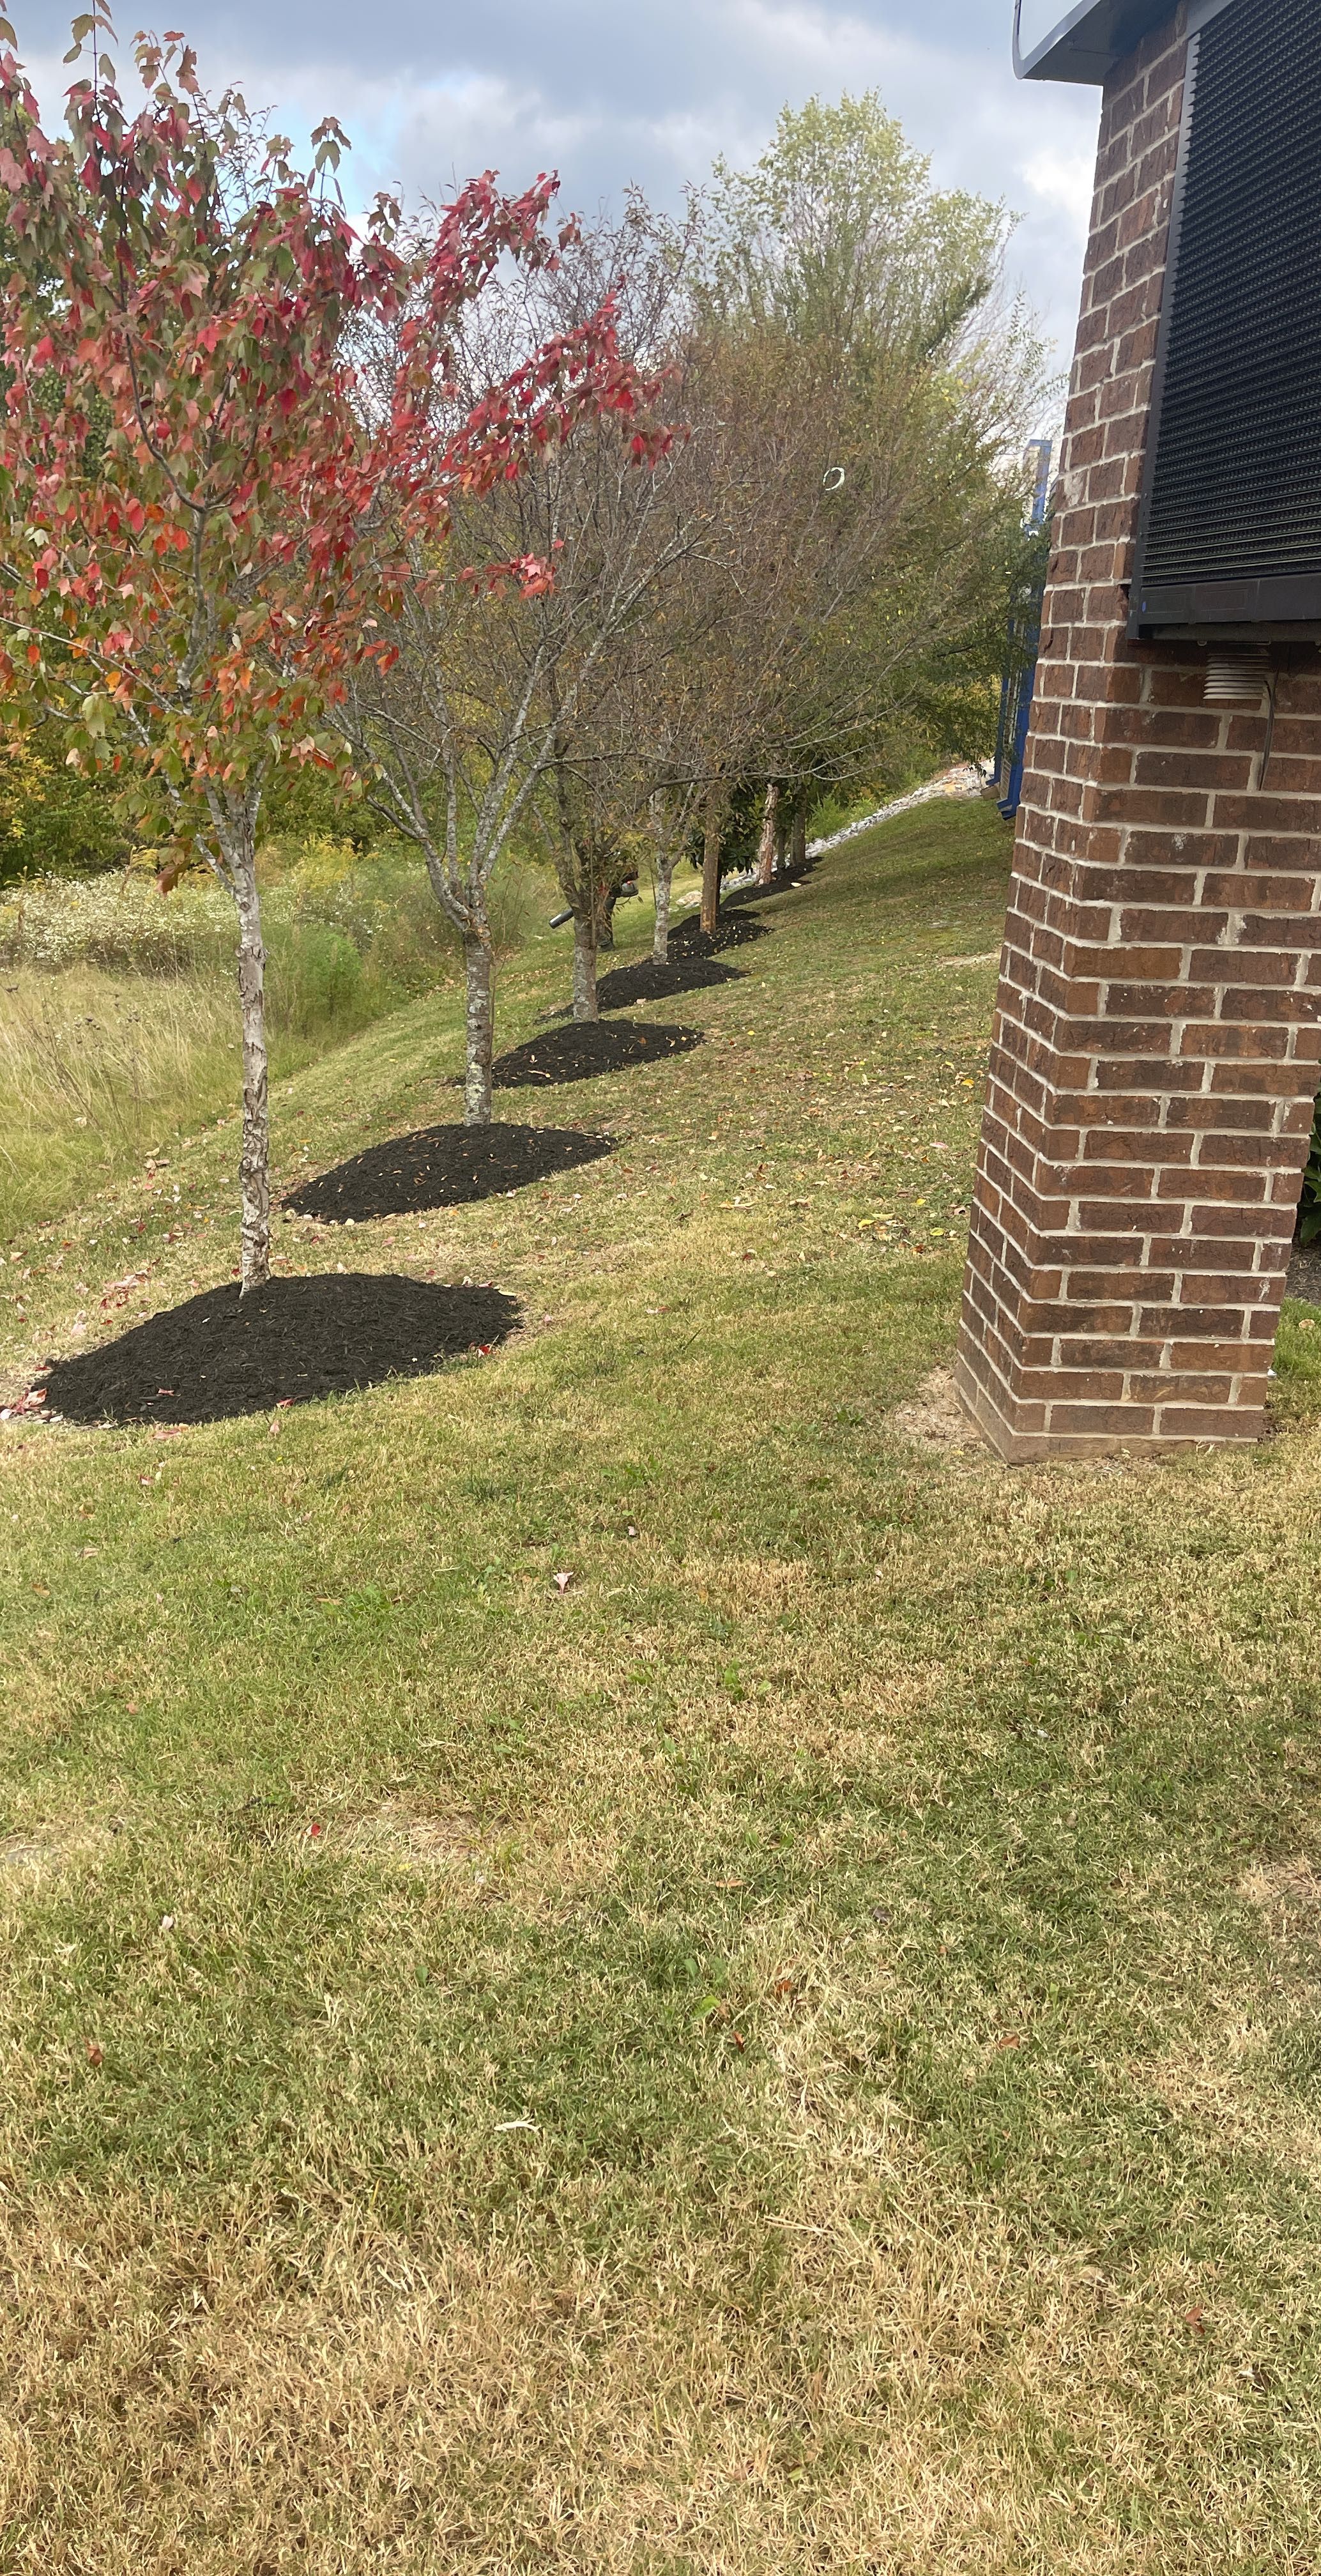 Hardscaping for The Right Price Right Choice Lawn Care Services in Murfreesboro, TN